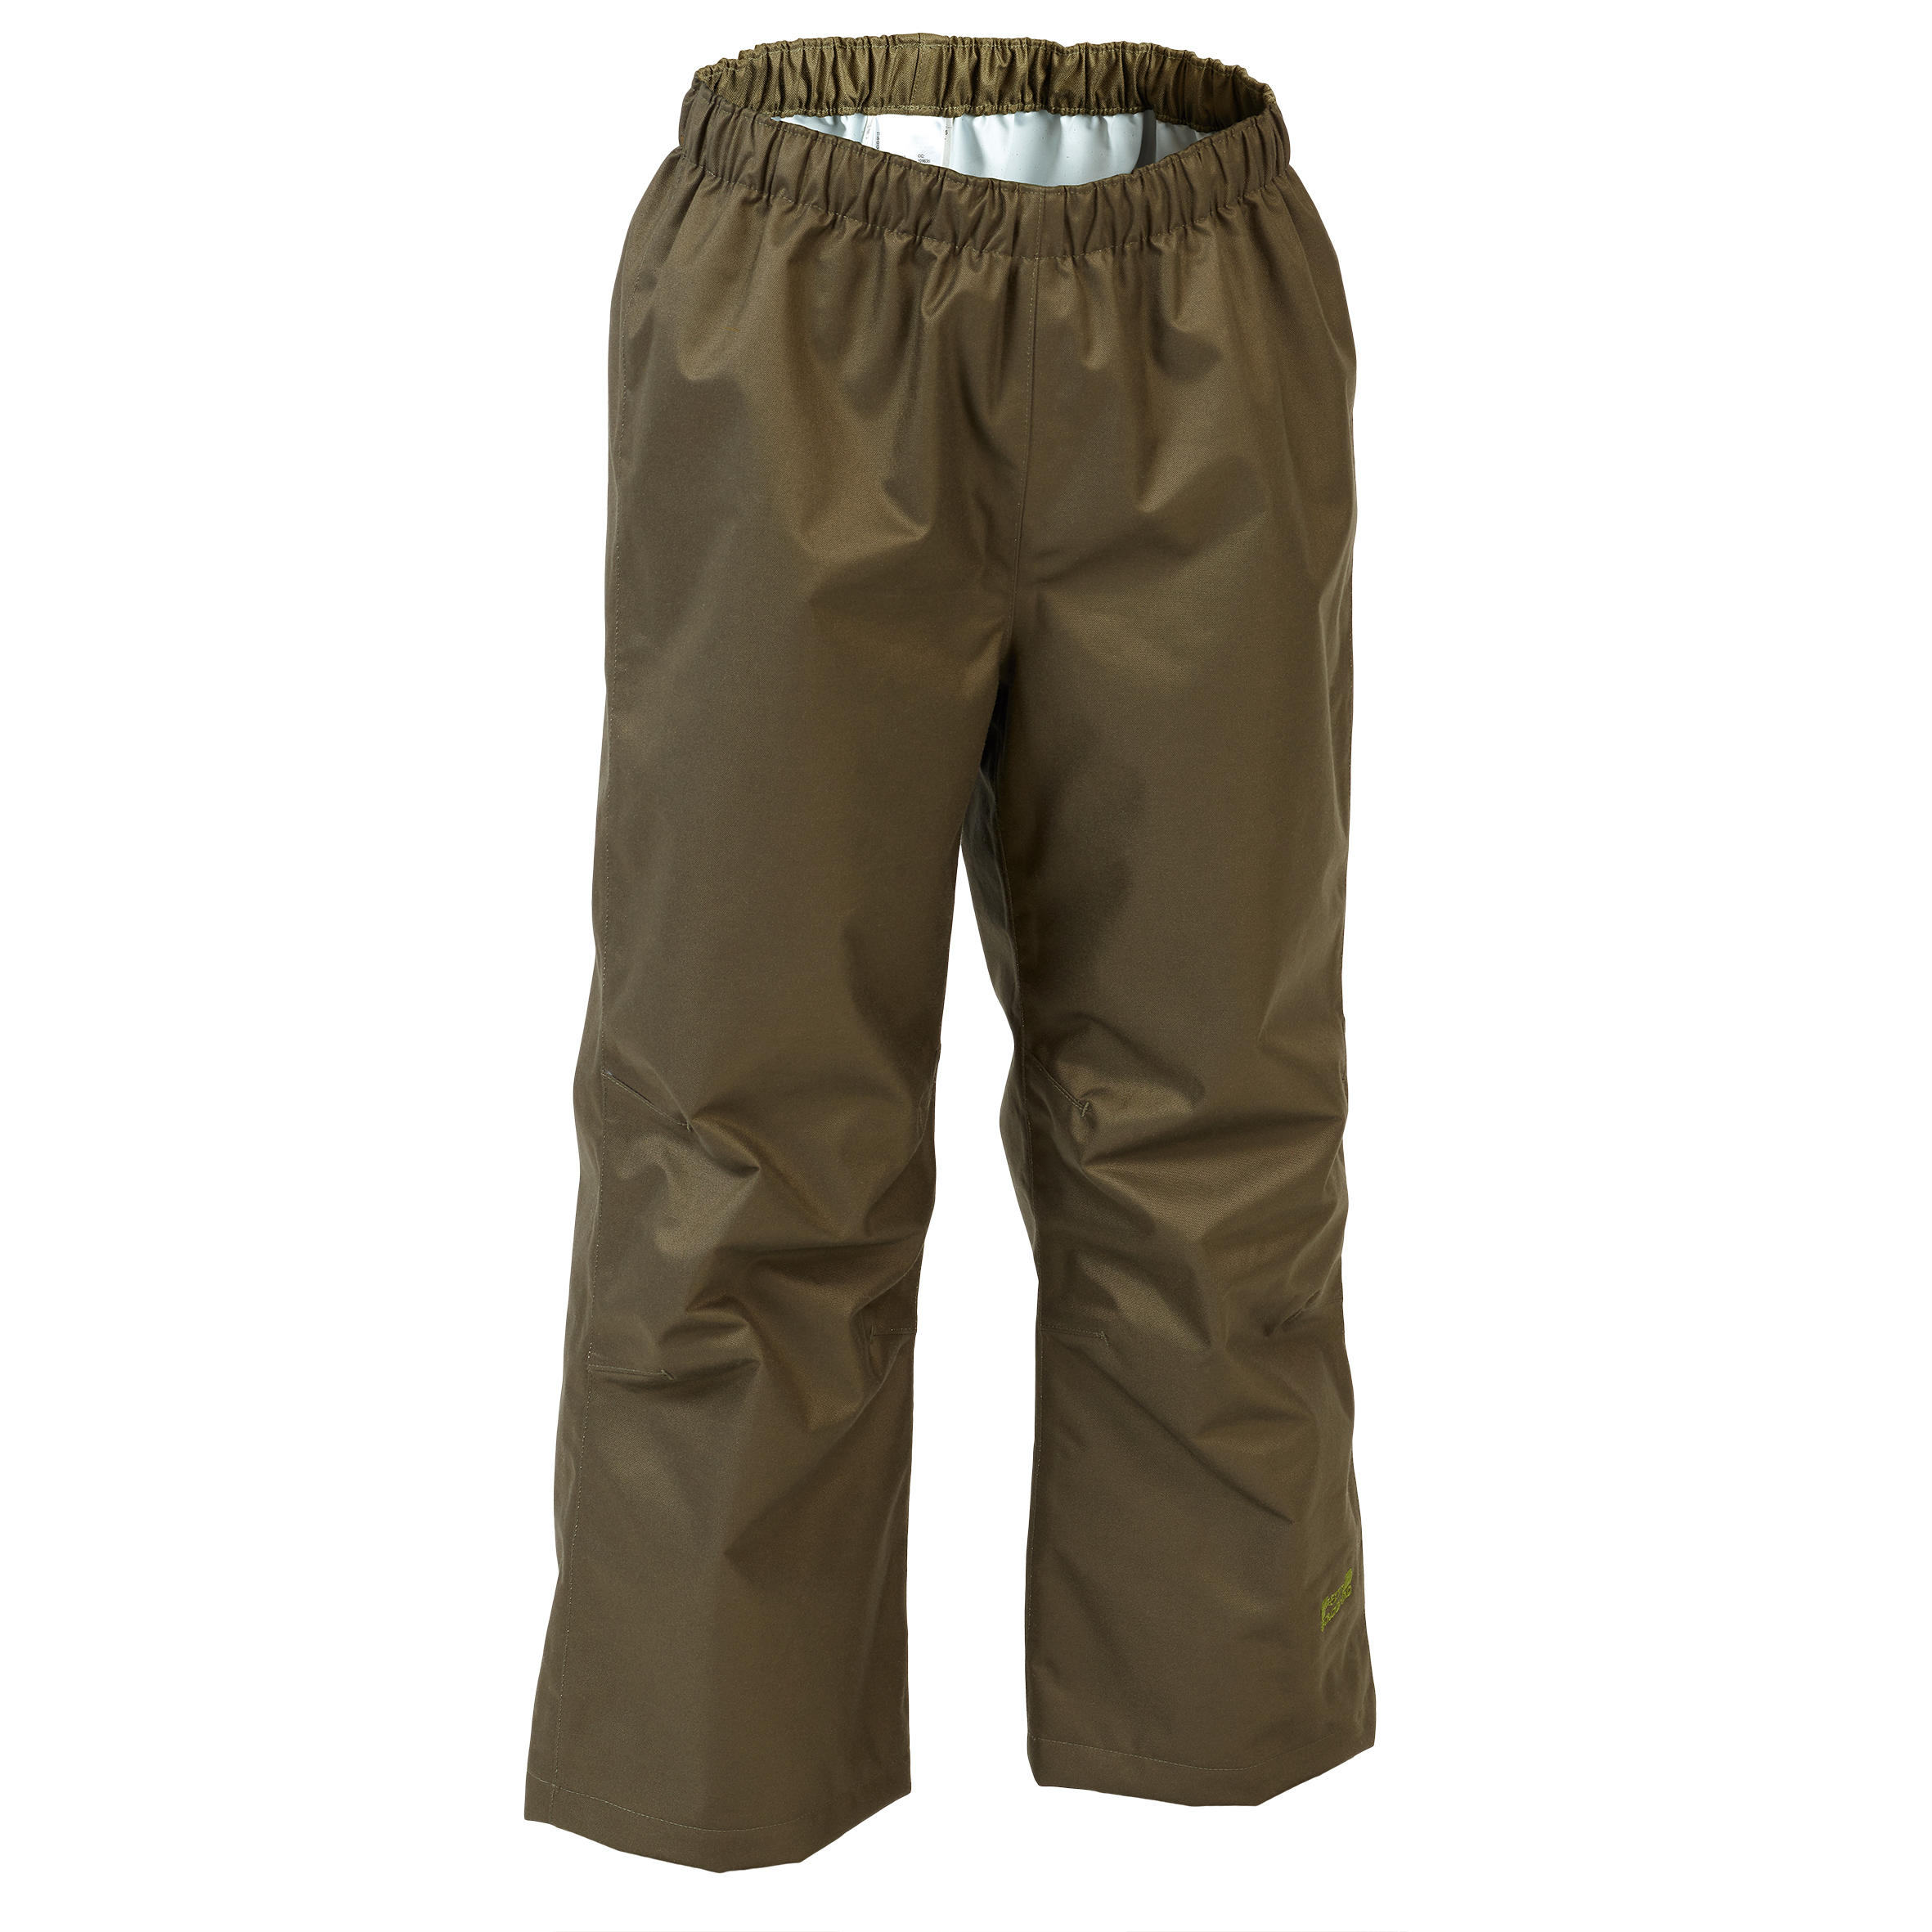 Buy Hiking Pants Online In India|Evostyle Mens Ski Pants|Quechua